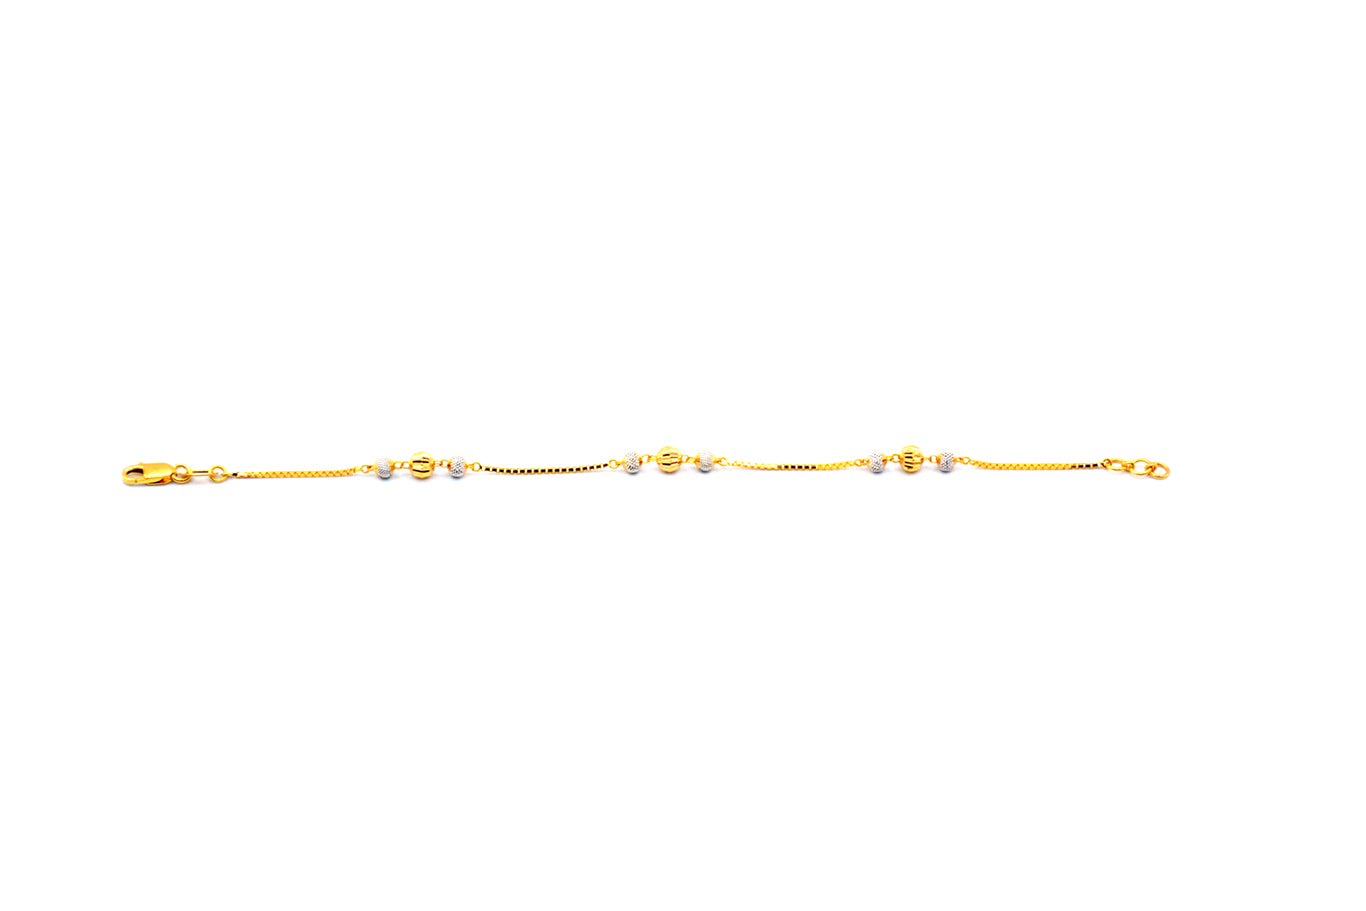 22K Gold Bracelet in Box Chain with 3 Yellow and White Gold Plated Diamond Cut Beads Set 1" Apart